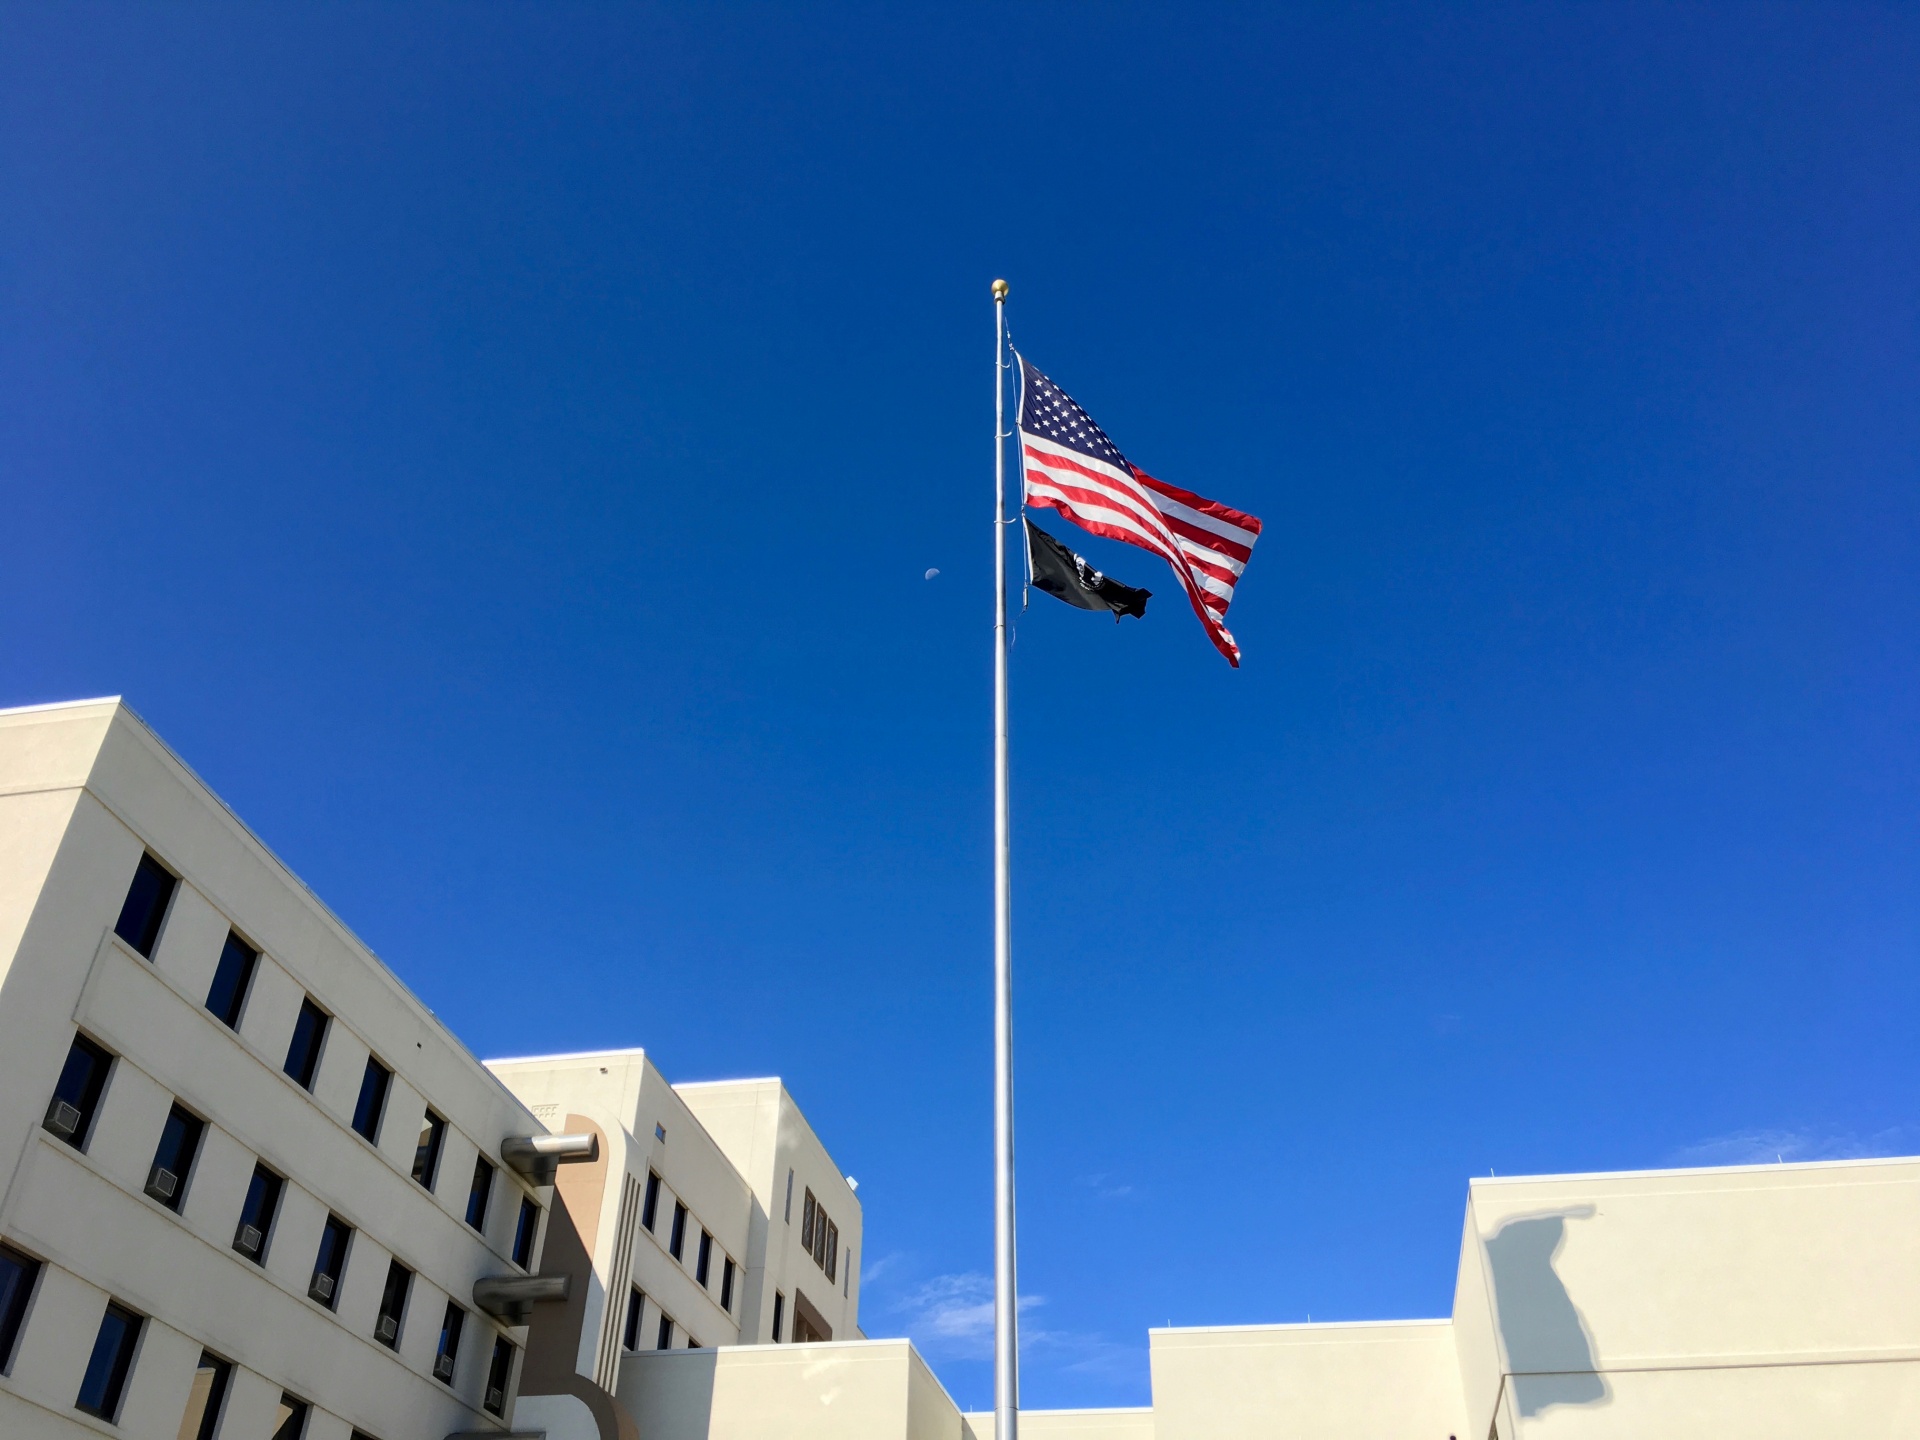 The US Flag and the POW Flag fly in front of the Grand Junction VA Medical Center. The Moon is visible in the BG behind the flags.